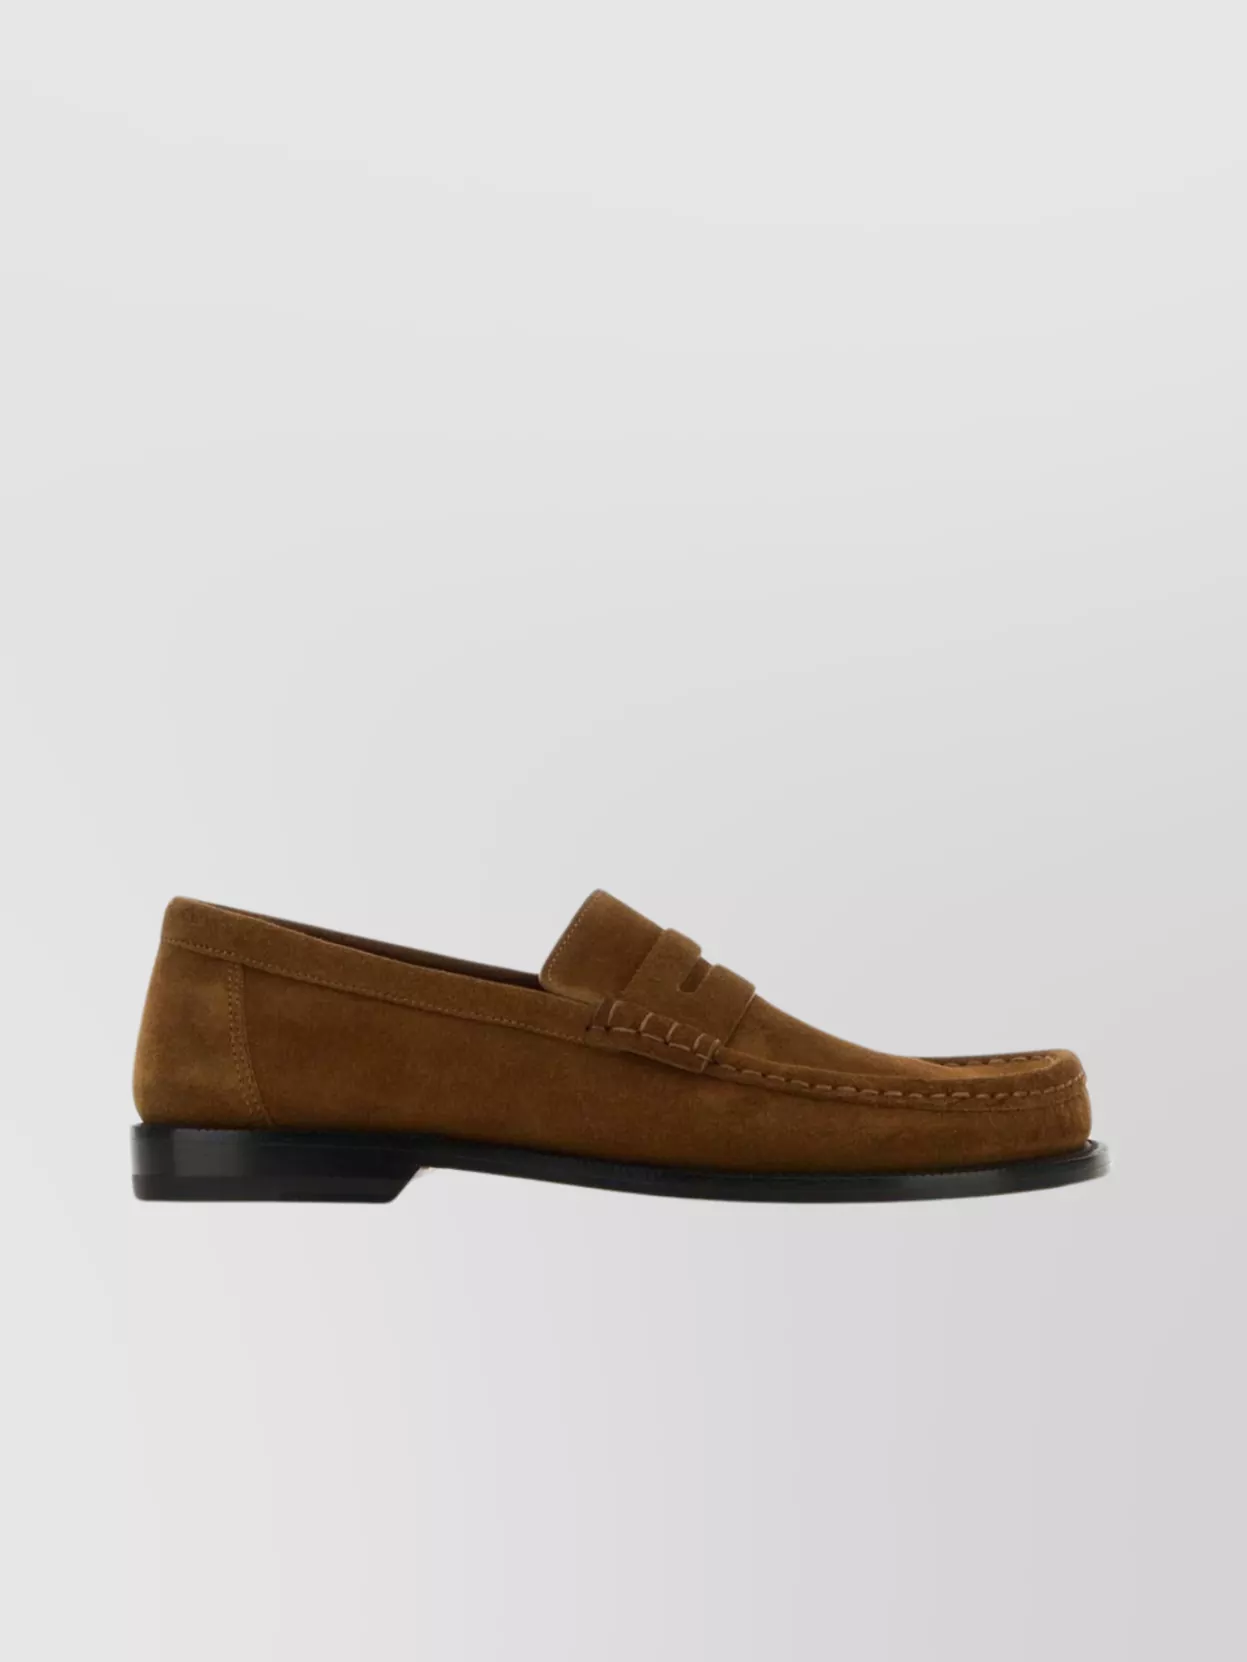 Shop Loewe Suede Stitched Penny Loafers